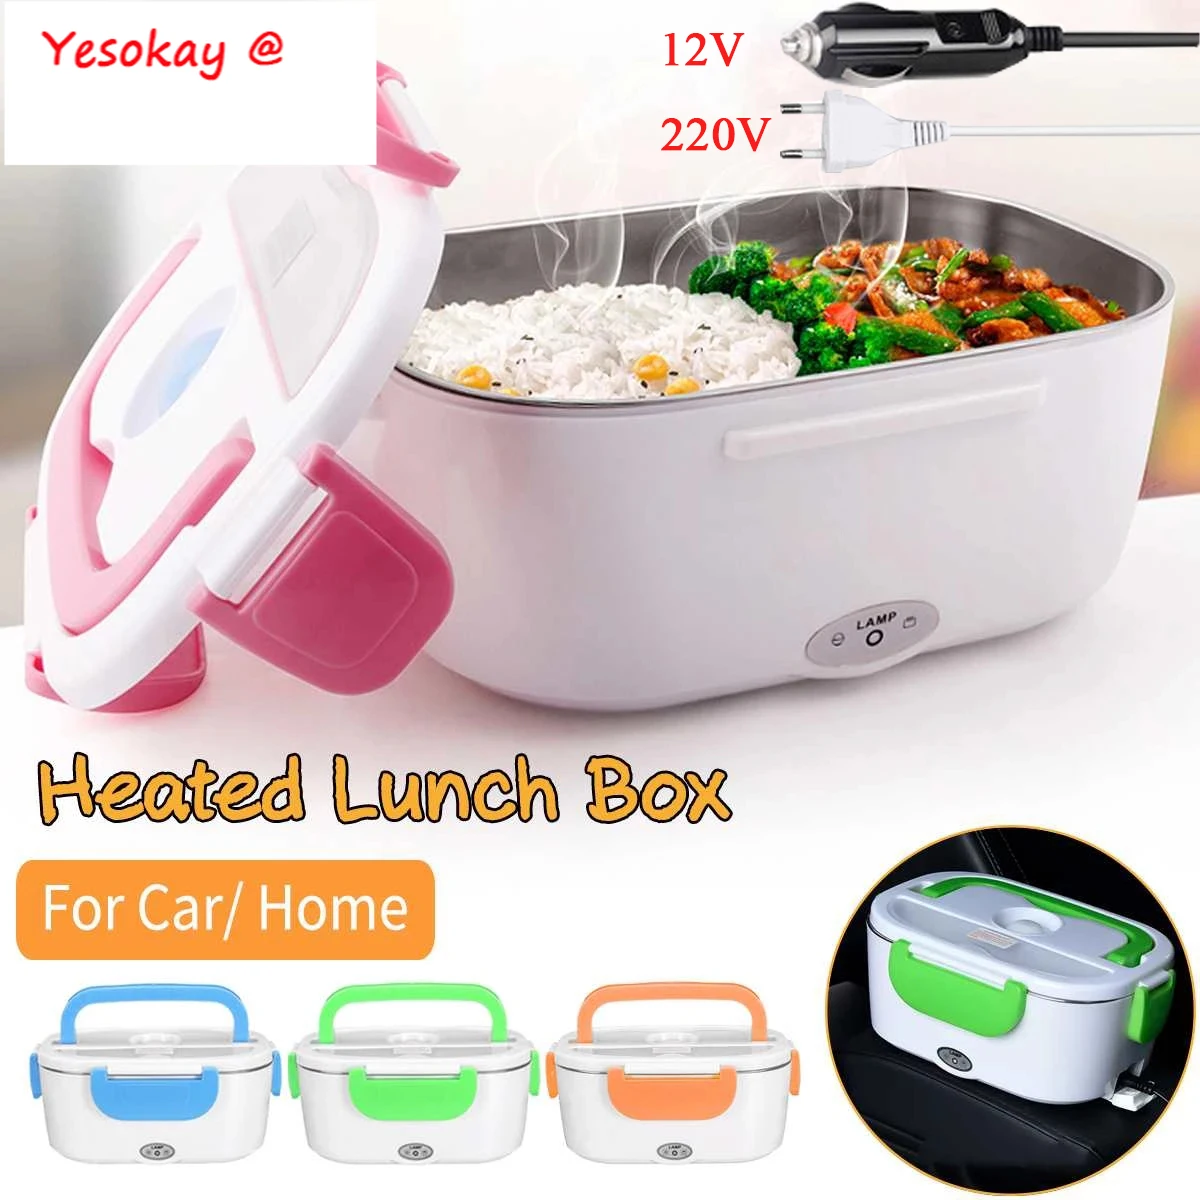 

12-24V 110V/220V Portable Electric Heating Stainless Steel Lunch Box Home Car Truck Home Rice Box Food Warmer Dinnerware Set